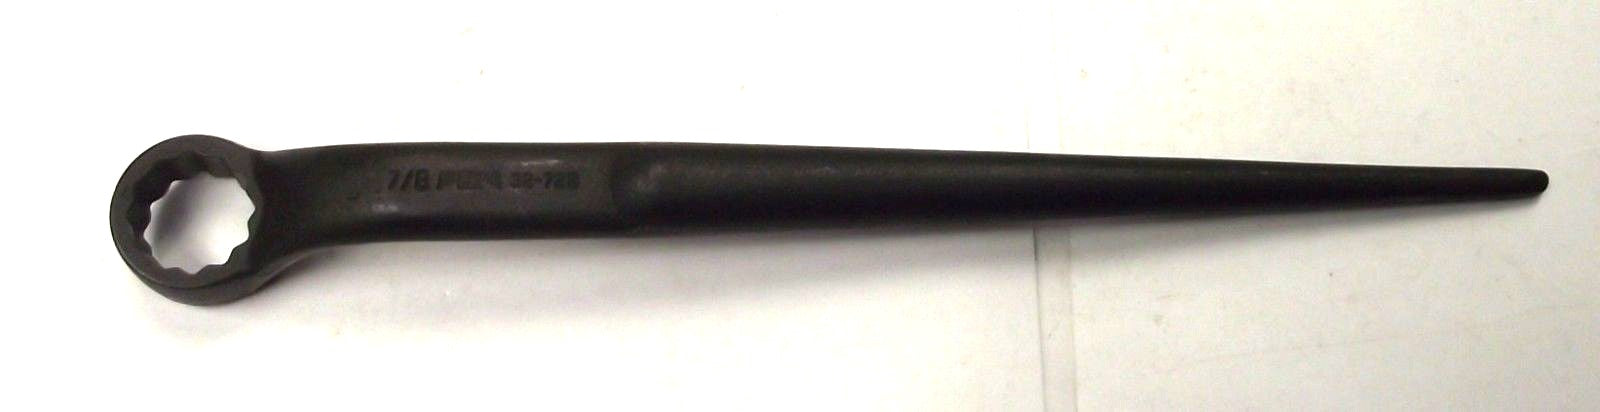 Armstrong 32-728 7/8" Structural Box Wrench USA